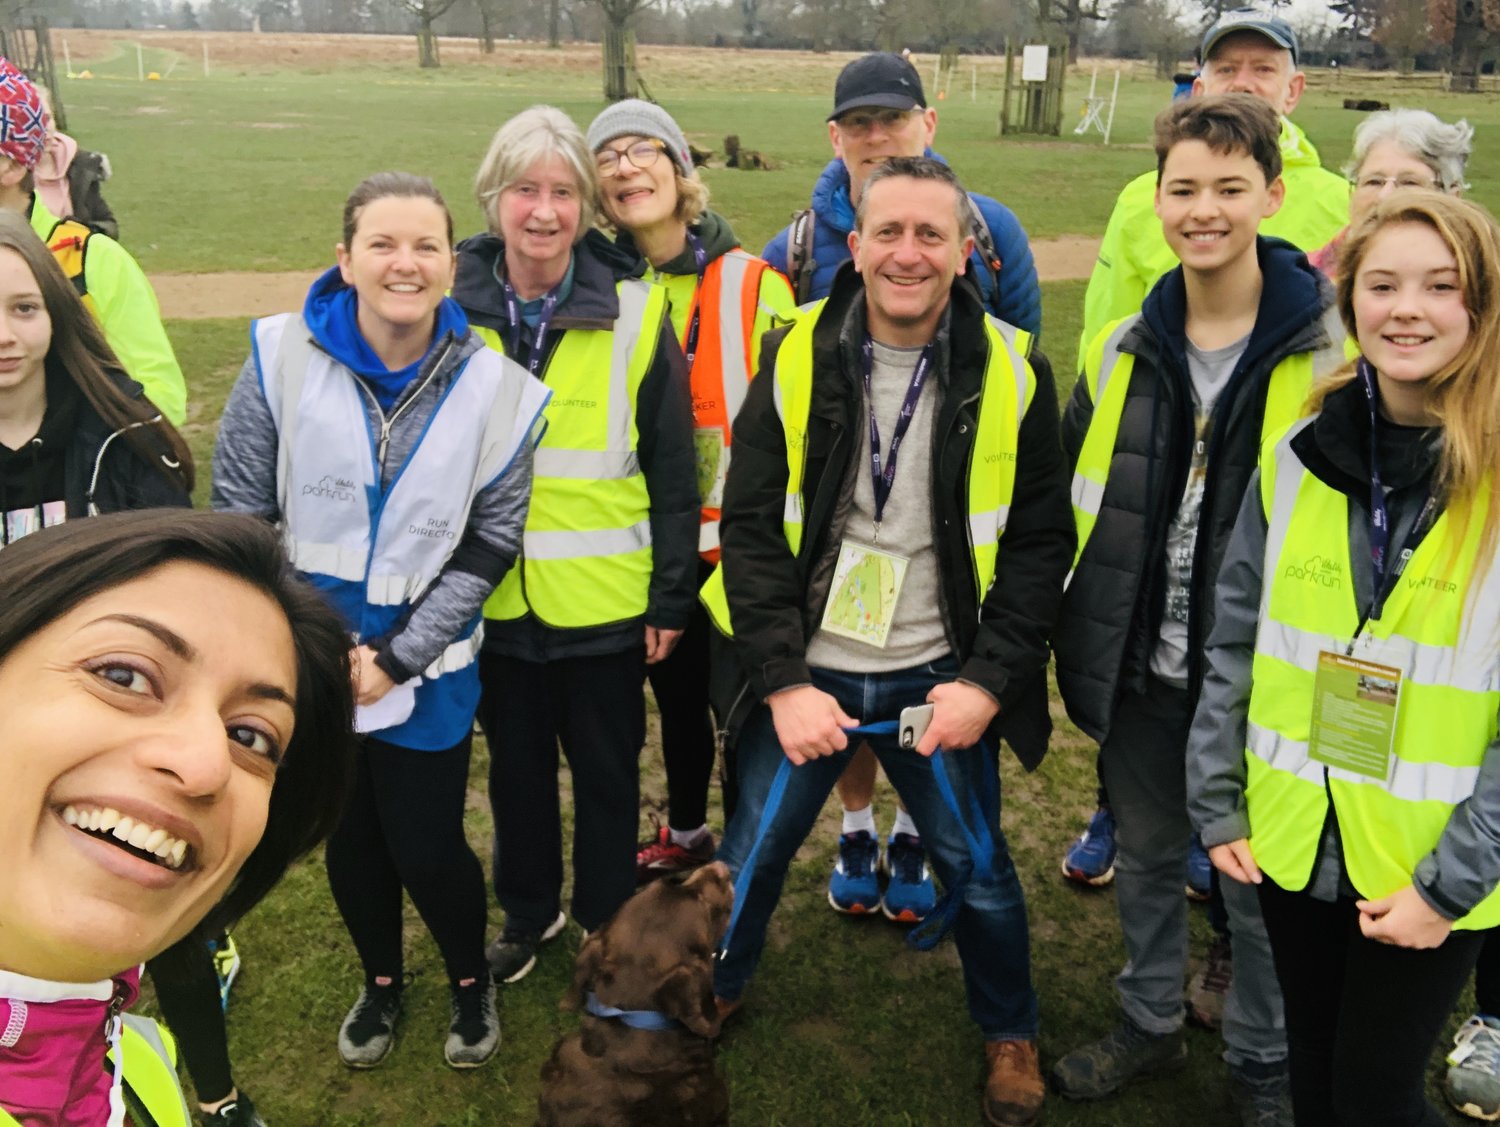 Volunteers at Parkrun start gathering and getting the park ready as early as 8 am itself! There is a lot to get done to make this run fun, organised and seamless (Image: Sumi Sarma)